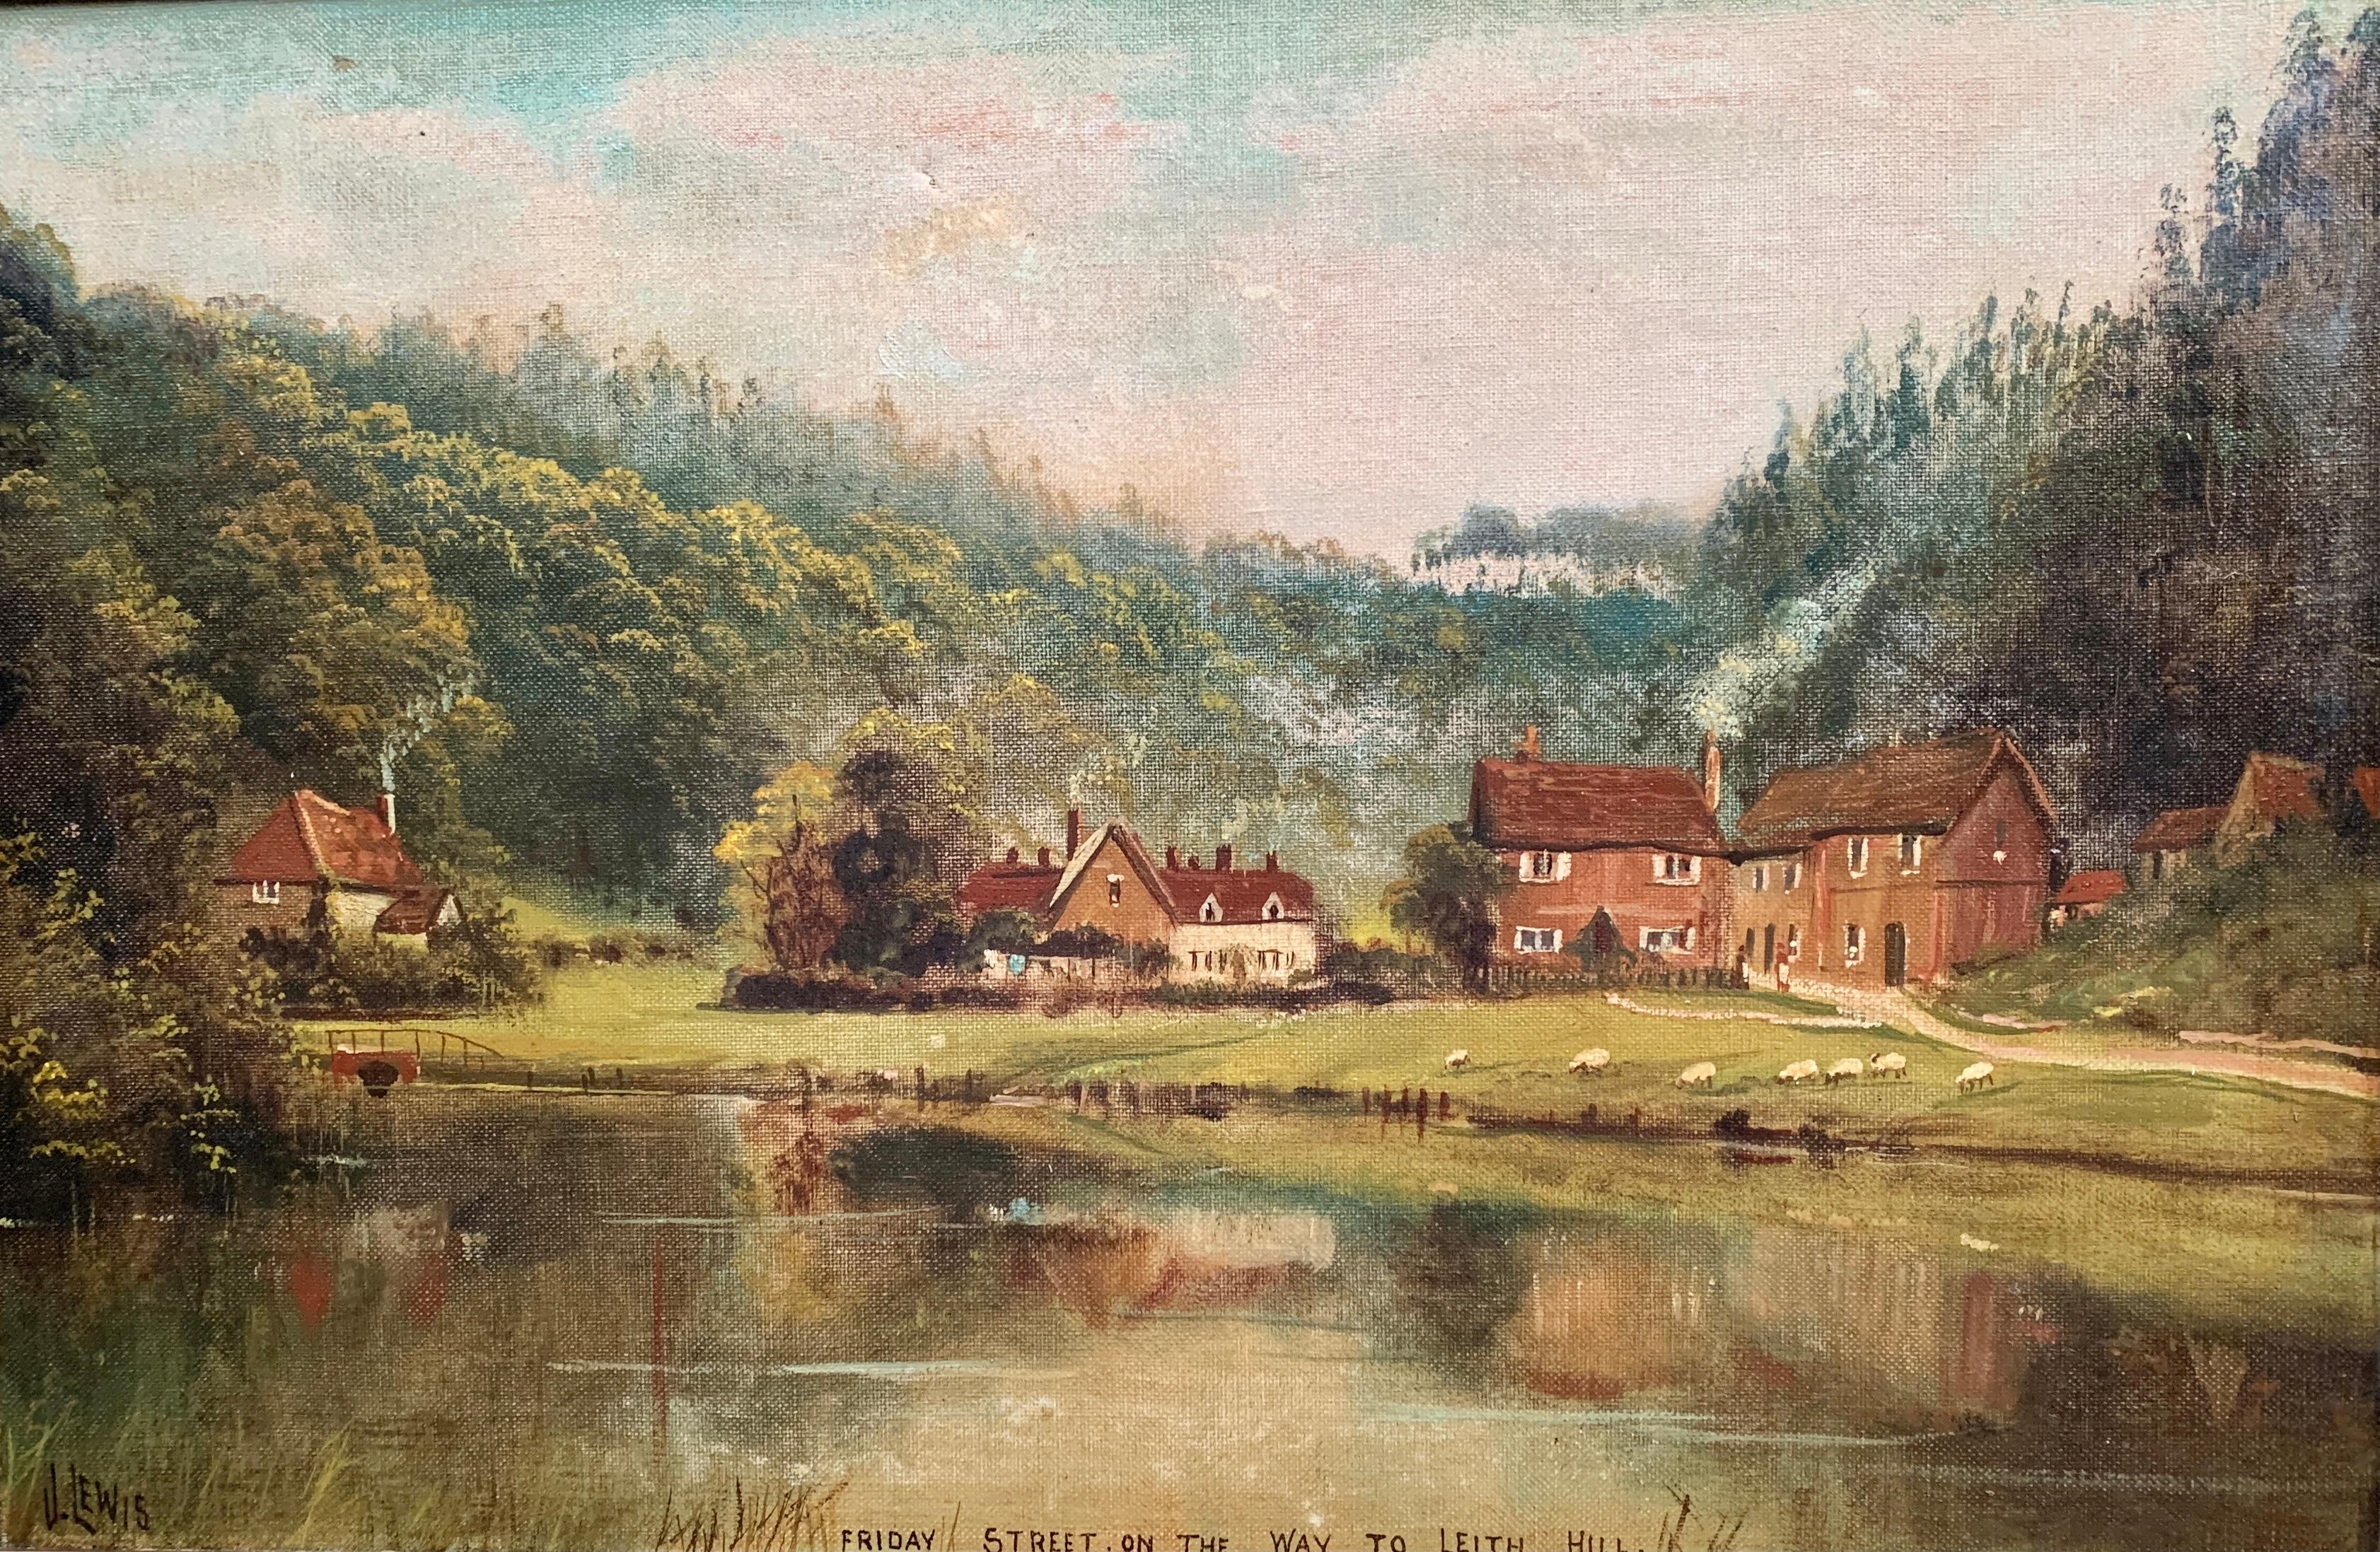 English 19th century Victorian landscape, Village scene, Leith Hill, Surrey UK - Painting by John Isaiah Lewis